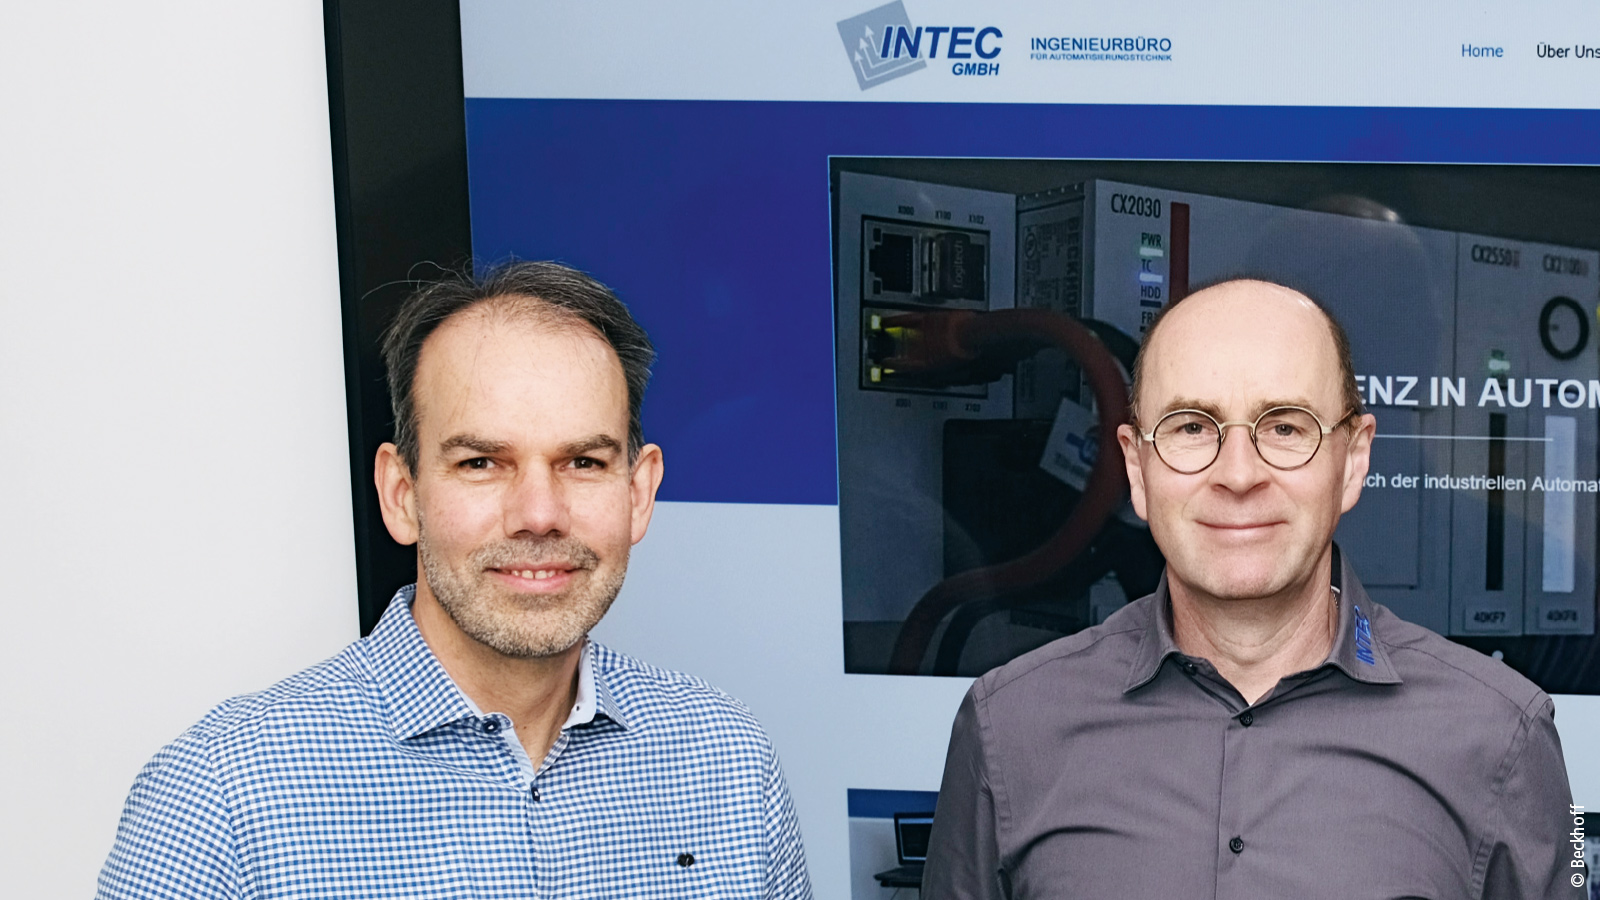 Wilm Schadach (left), branch manager at Beckhoff Monheim, and Erik Heimermann, managing director at Intec, were also involved in the BCSS project.